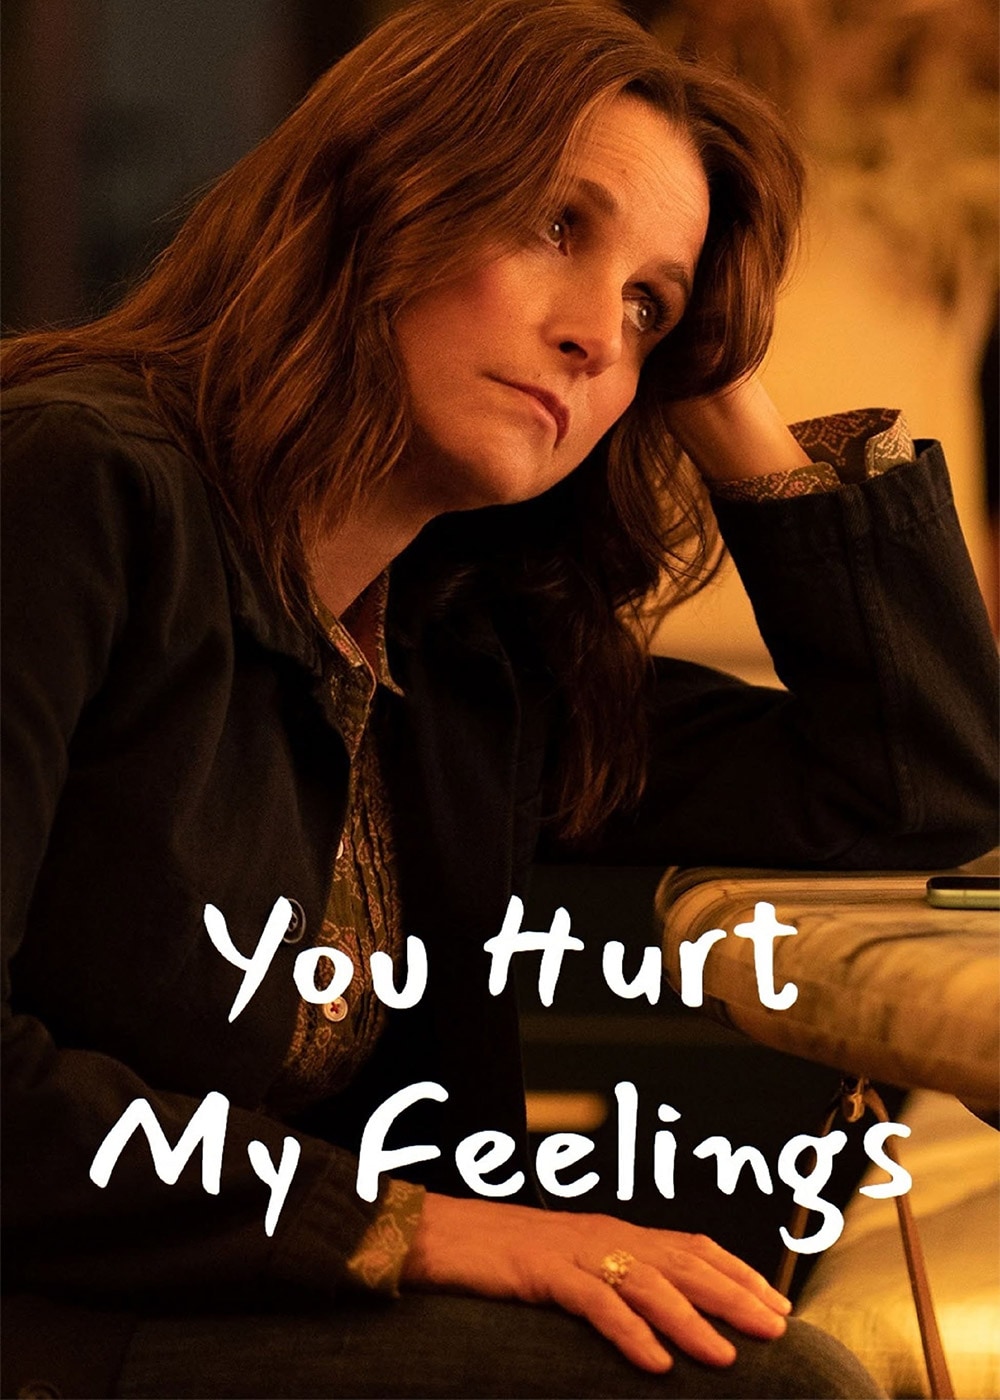 movie review for you hurt my feelings